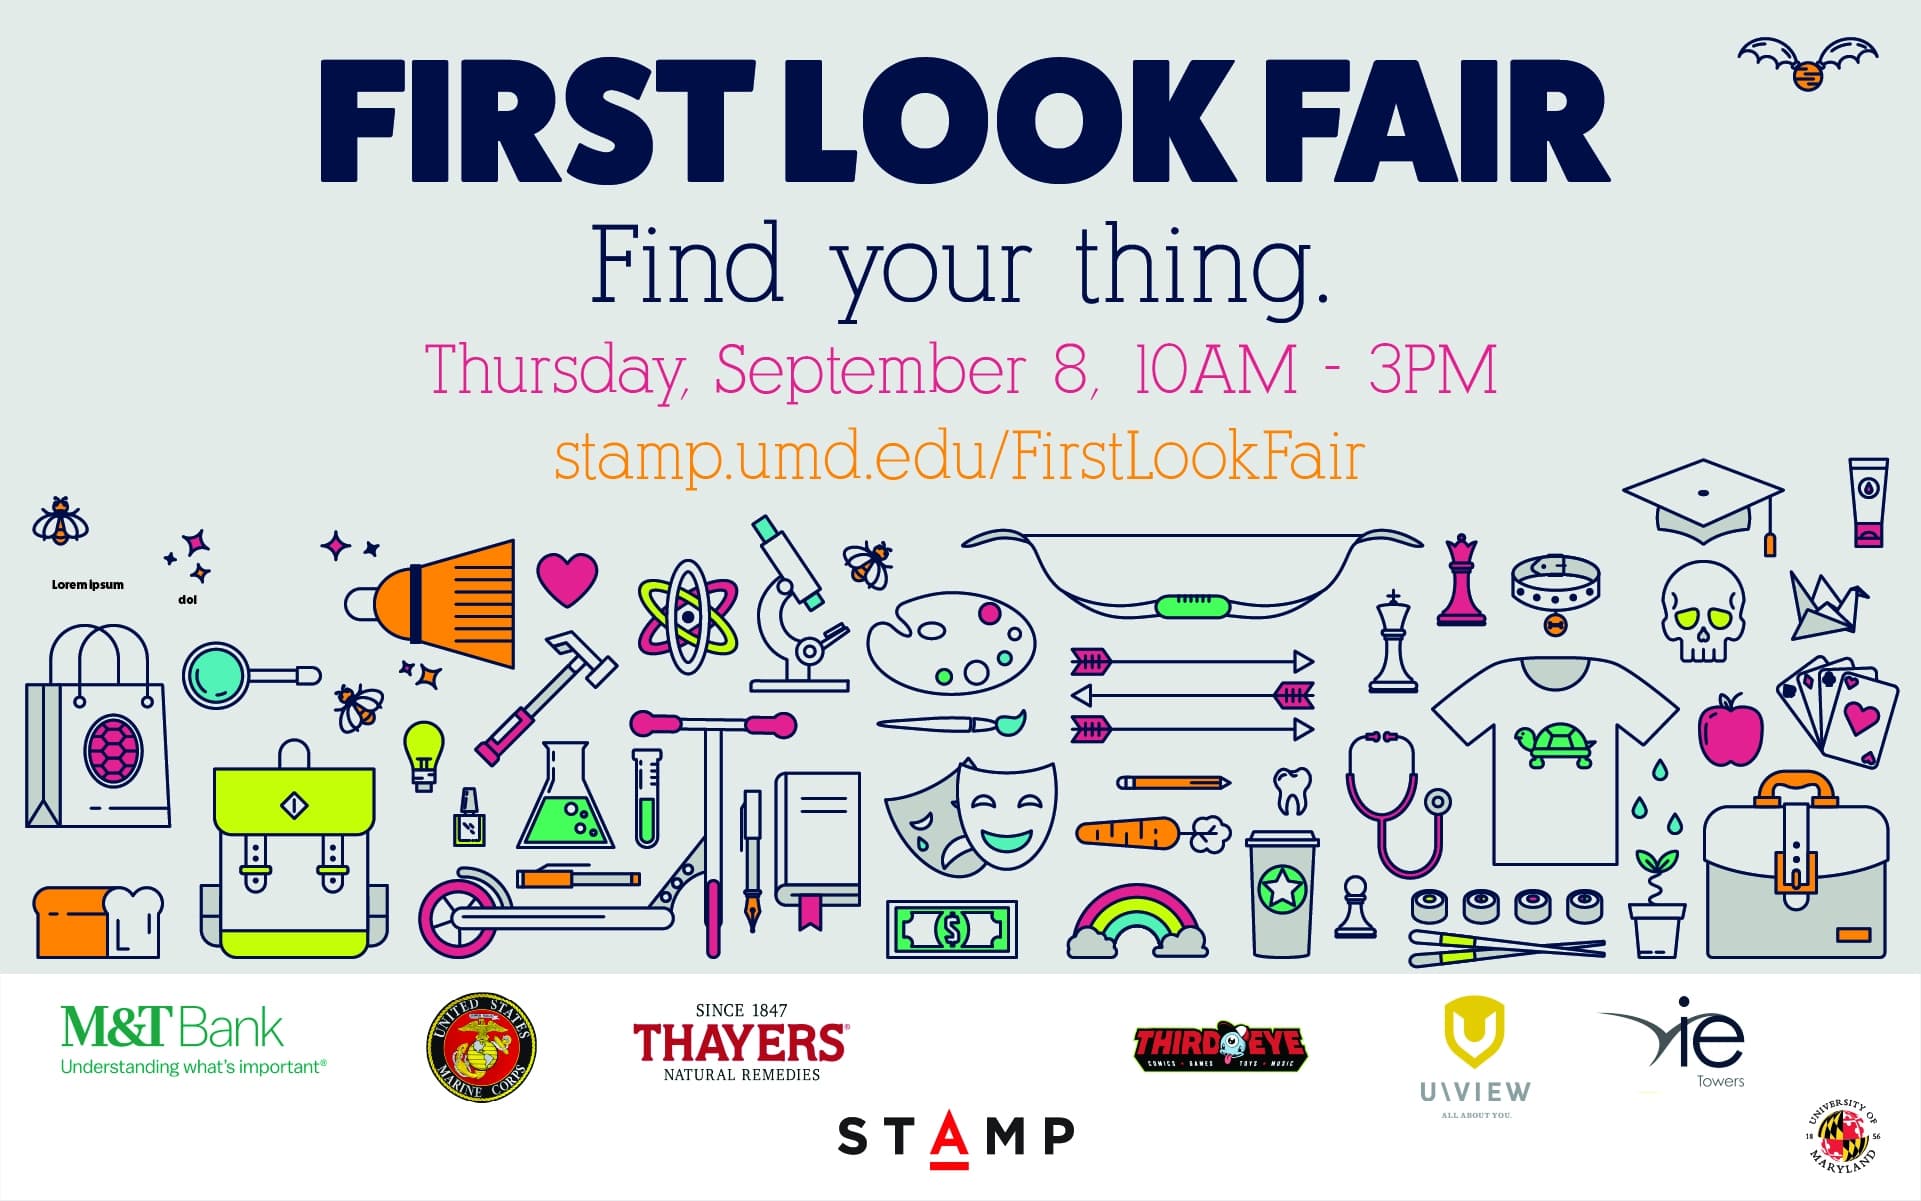 Find your thing at the First Look Fair